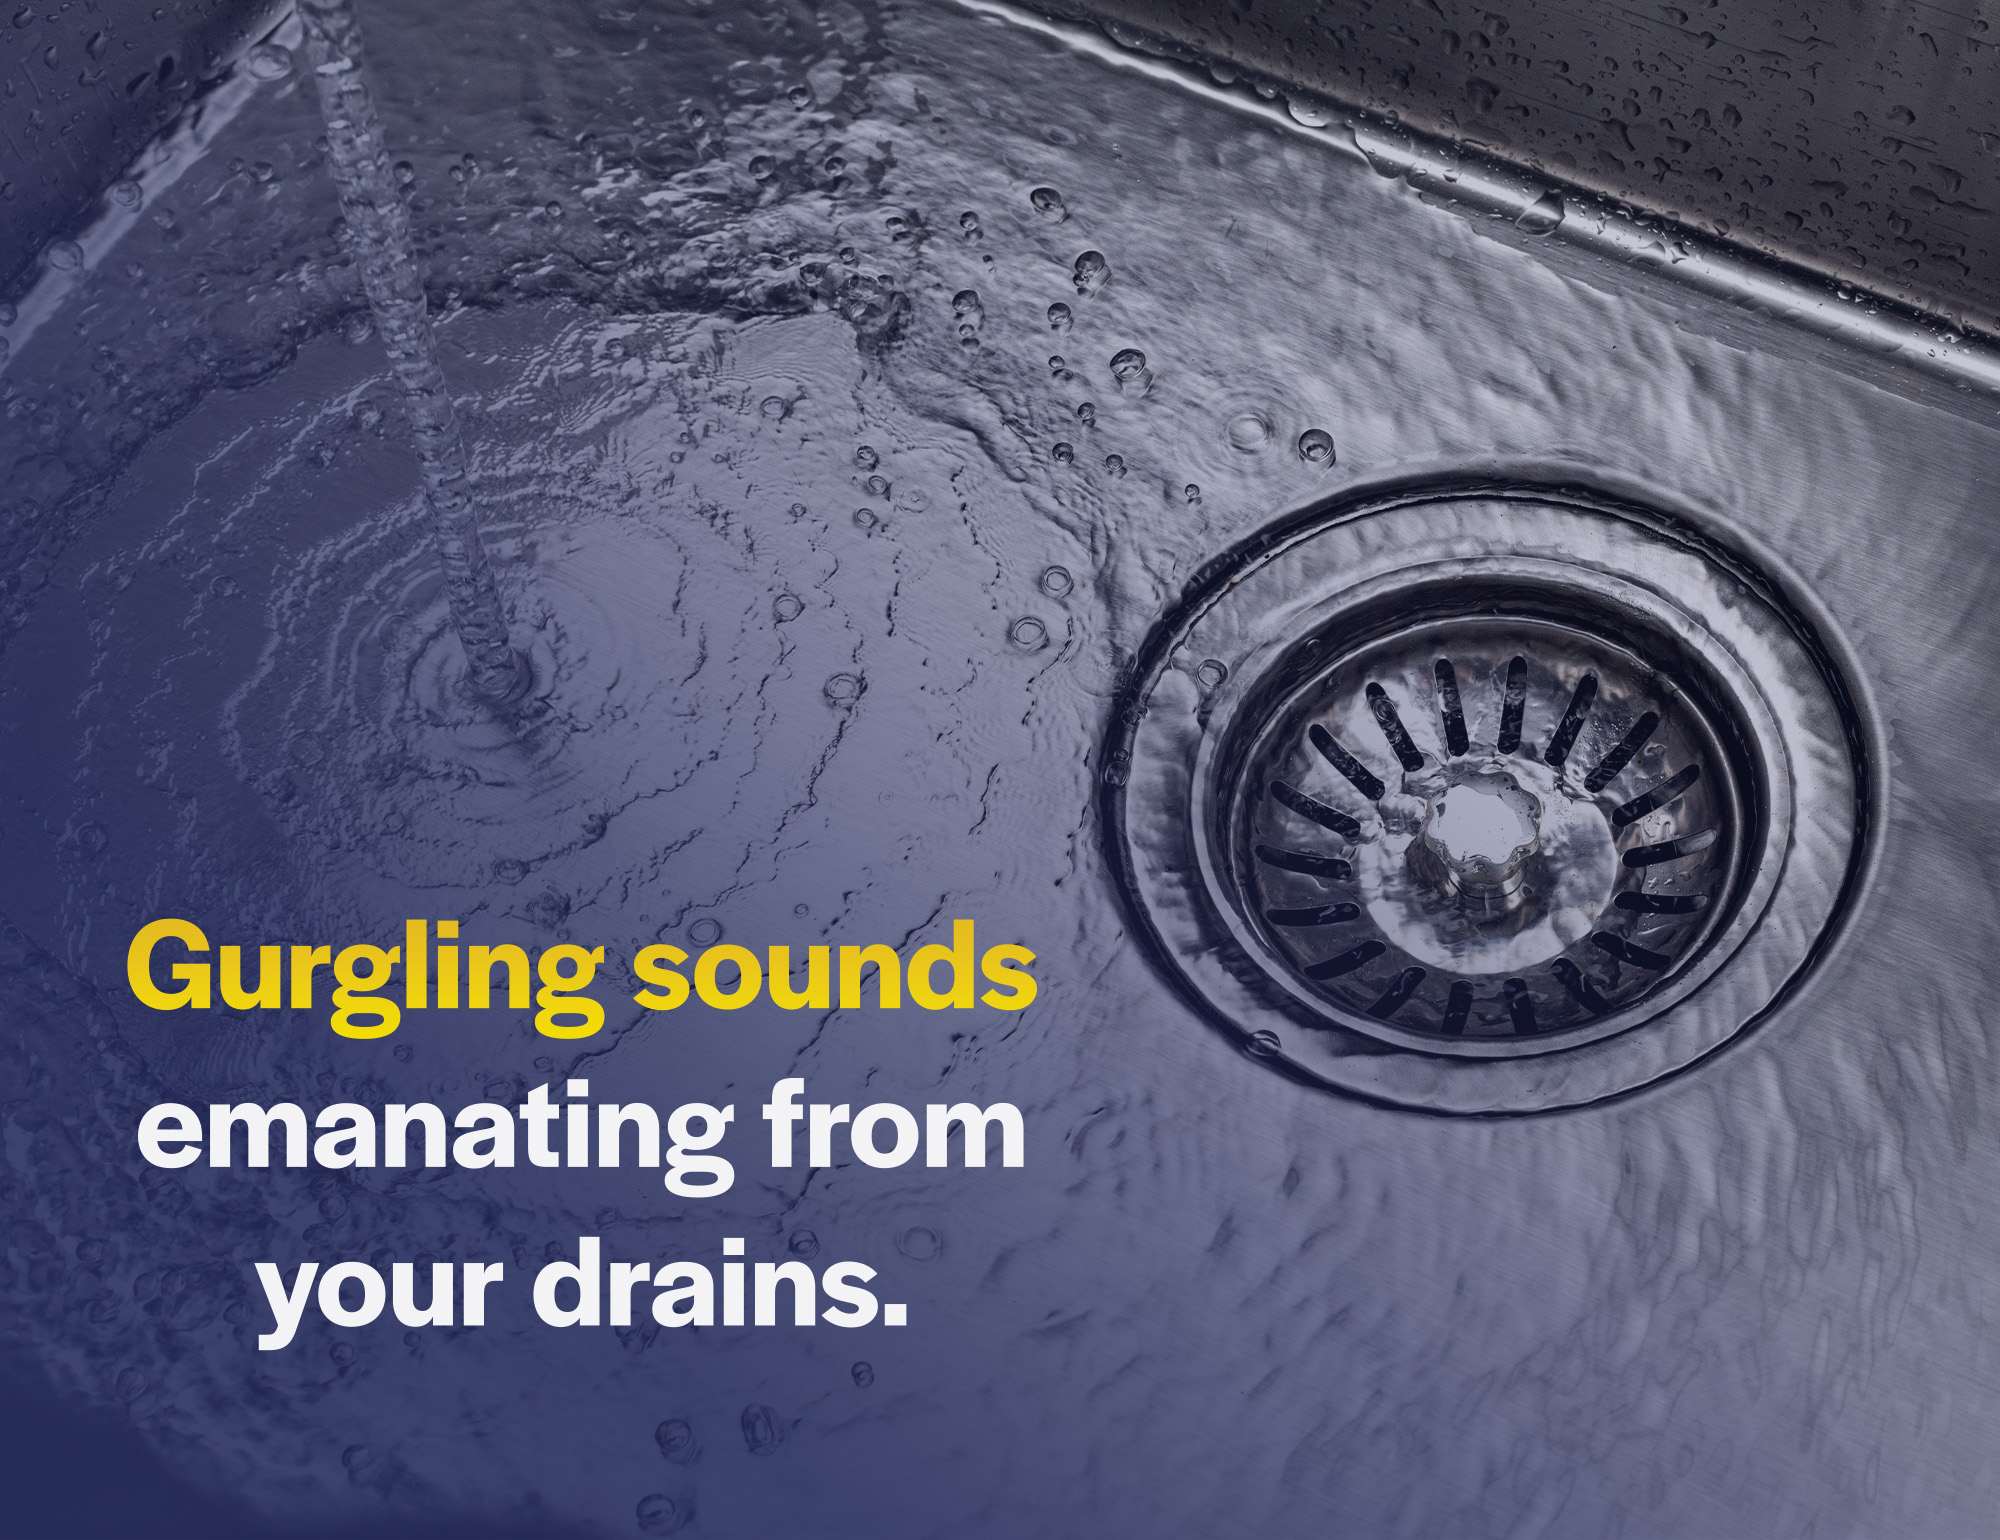 Gurgling sounds emanating from your drains